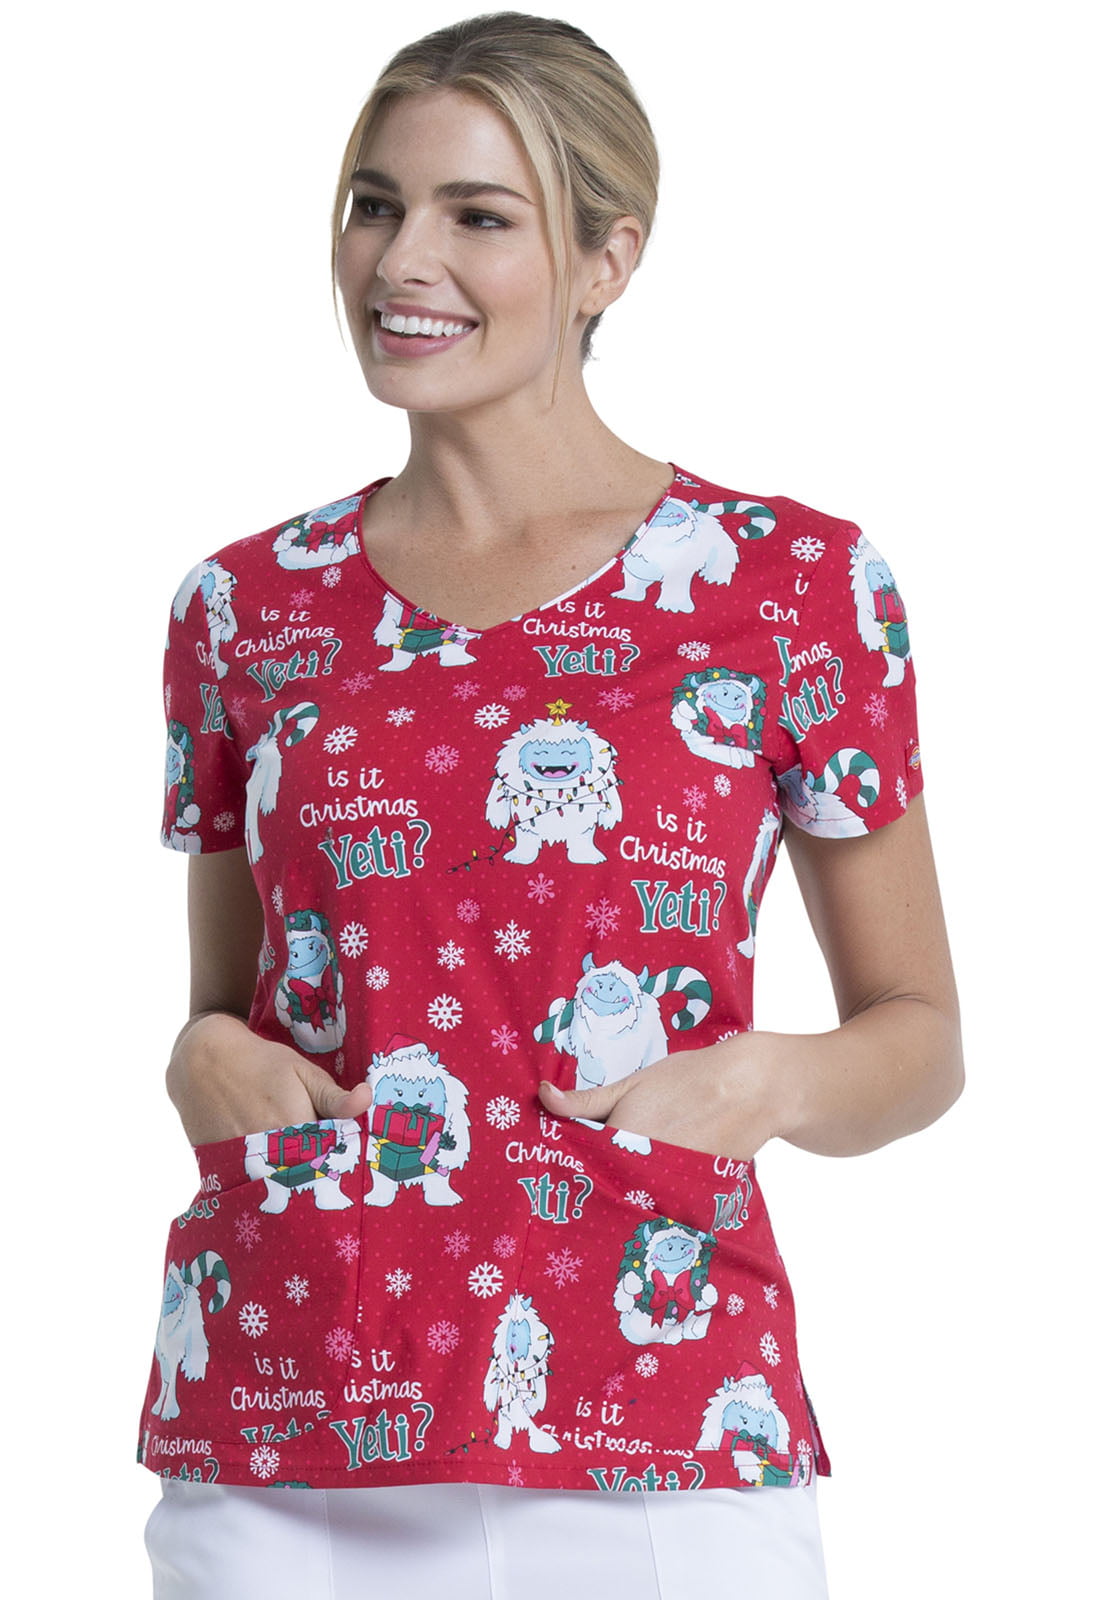 Download Dickies - Dickies EDS Holiday/Winter V-Neck Scrub Top DK700, M, Yeti For Christmas? - Walmart ...